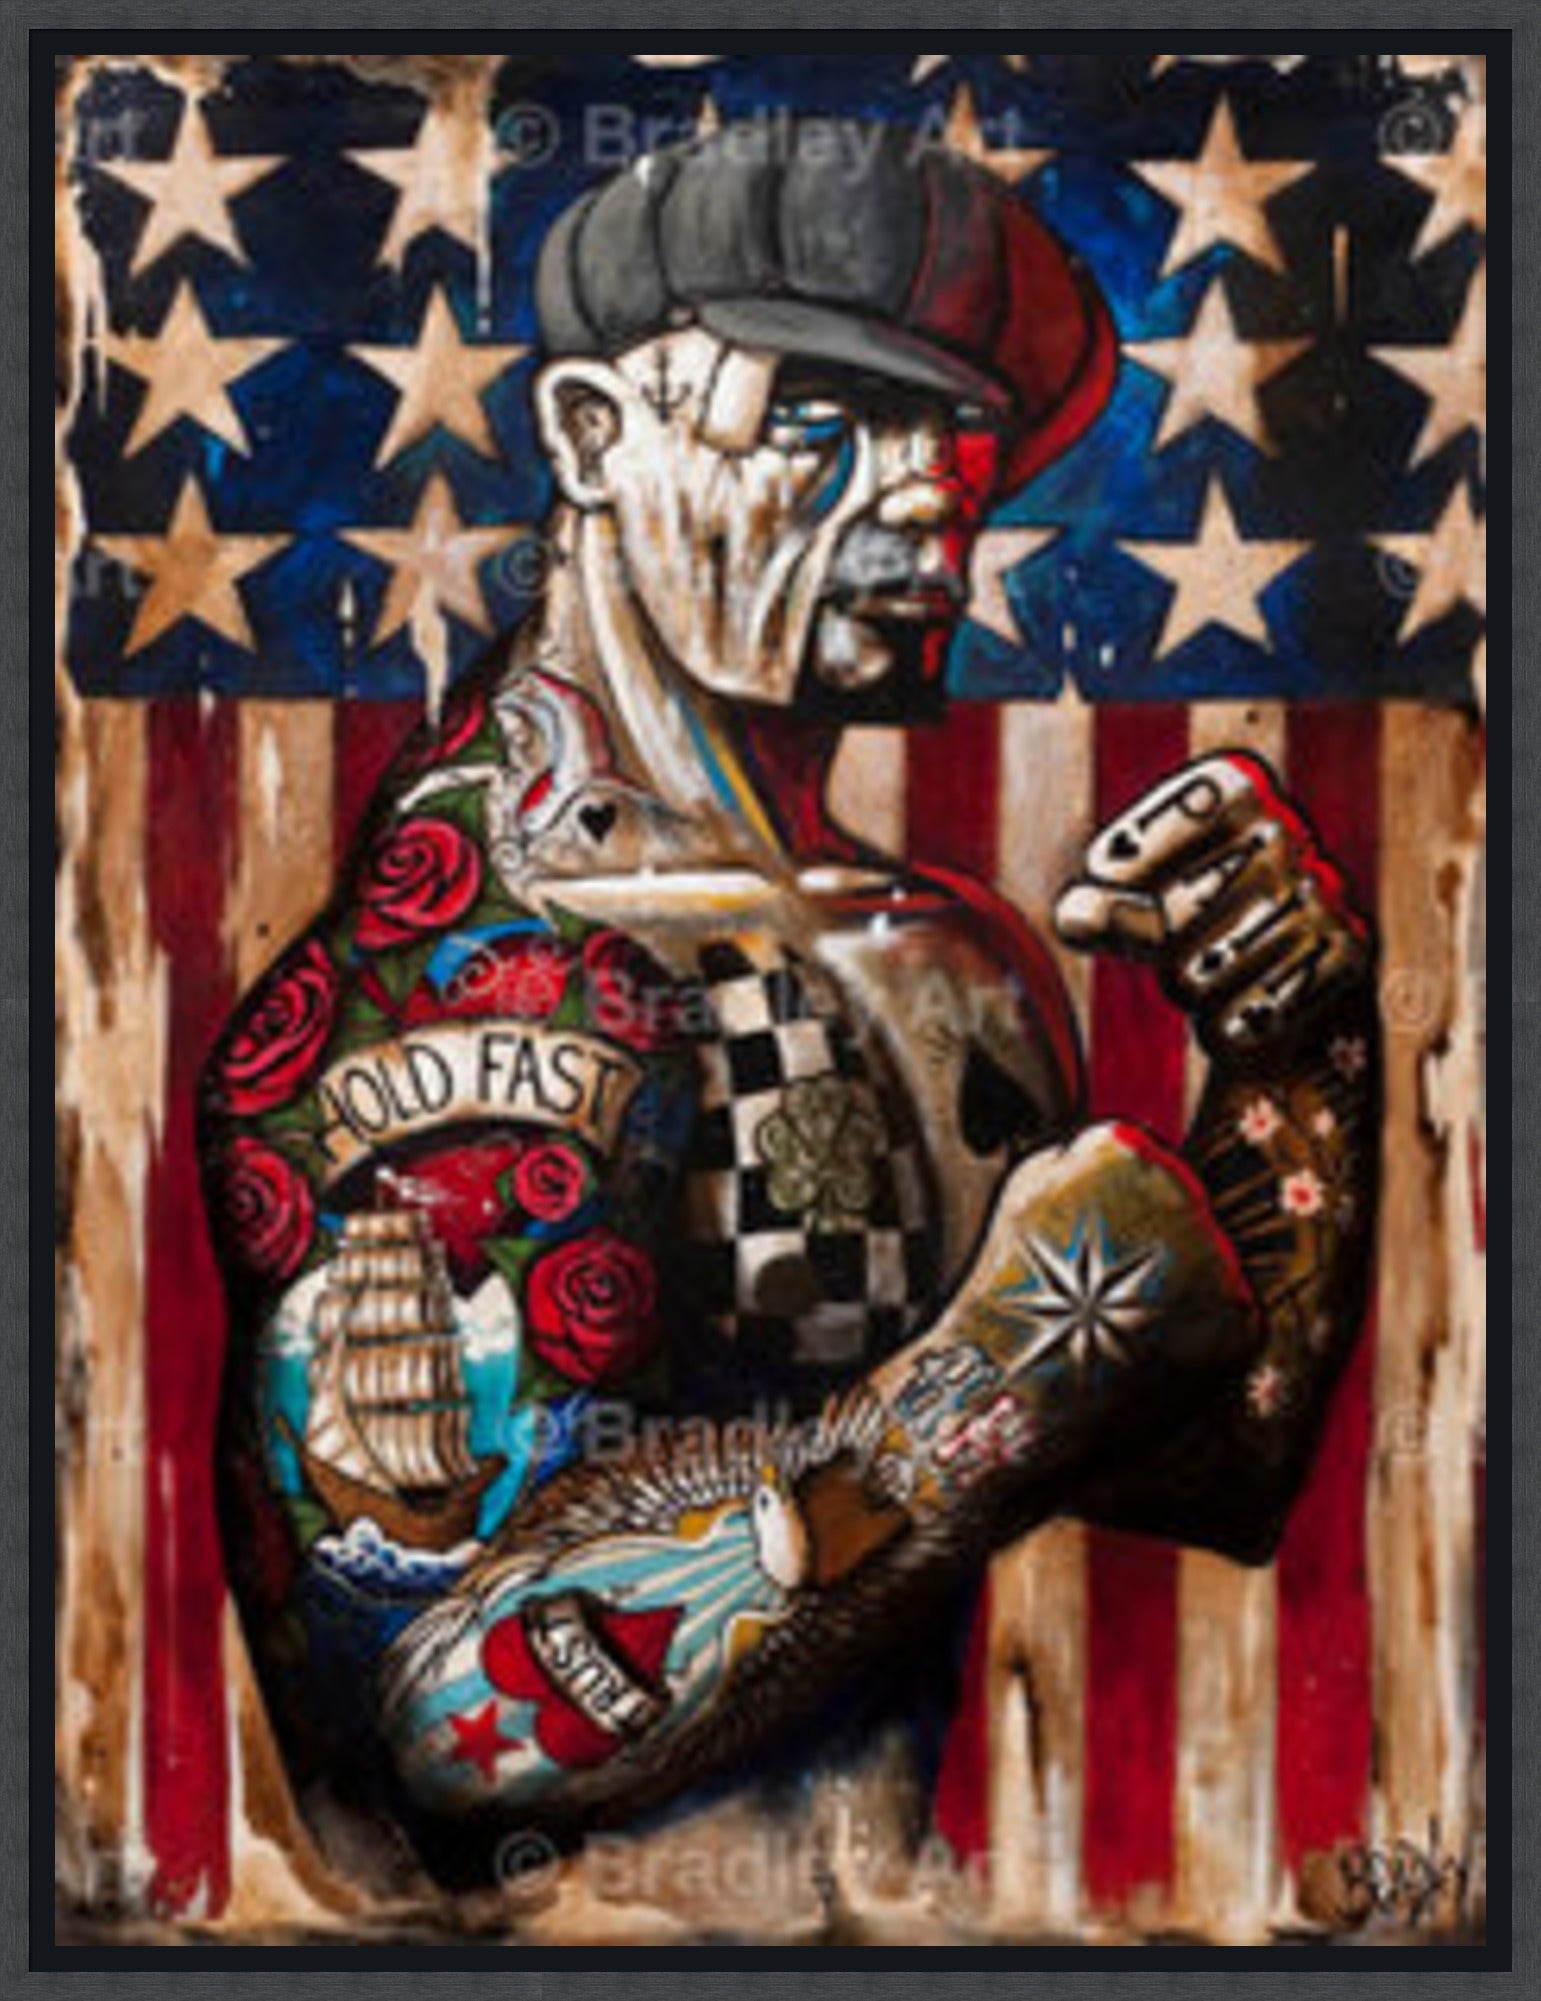 "Hold Fast for Harley Davidson" HE Canvas